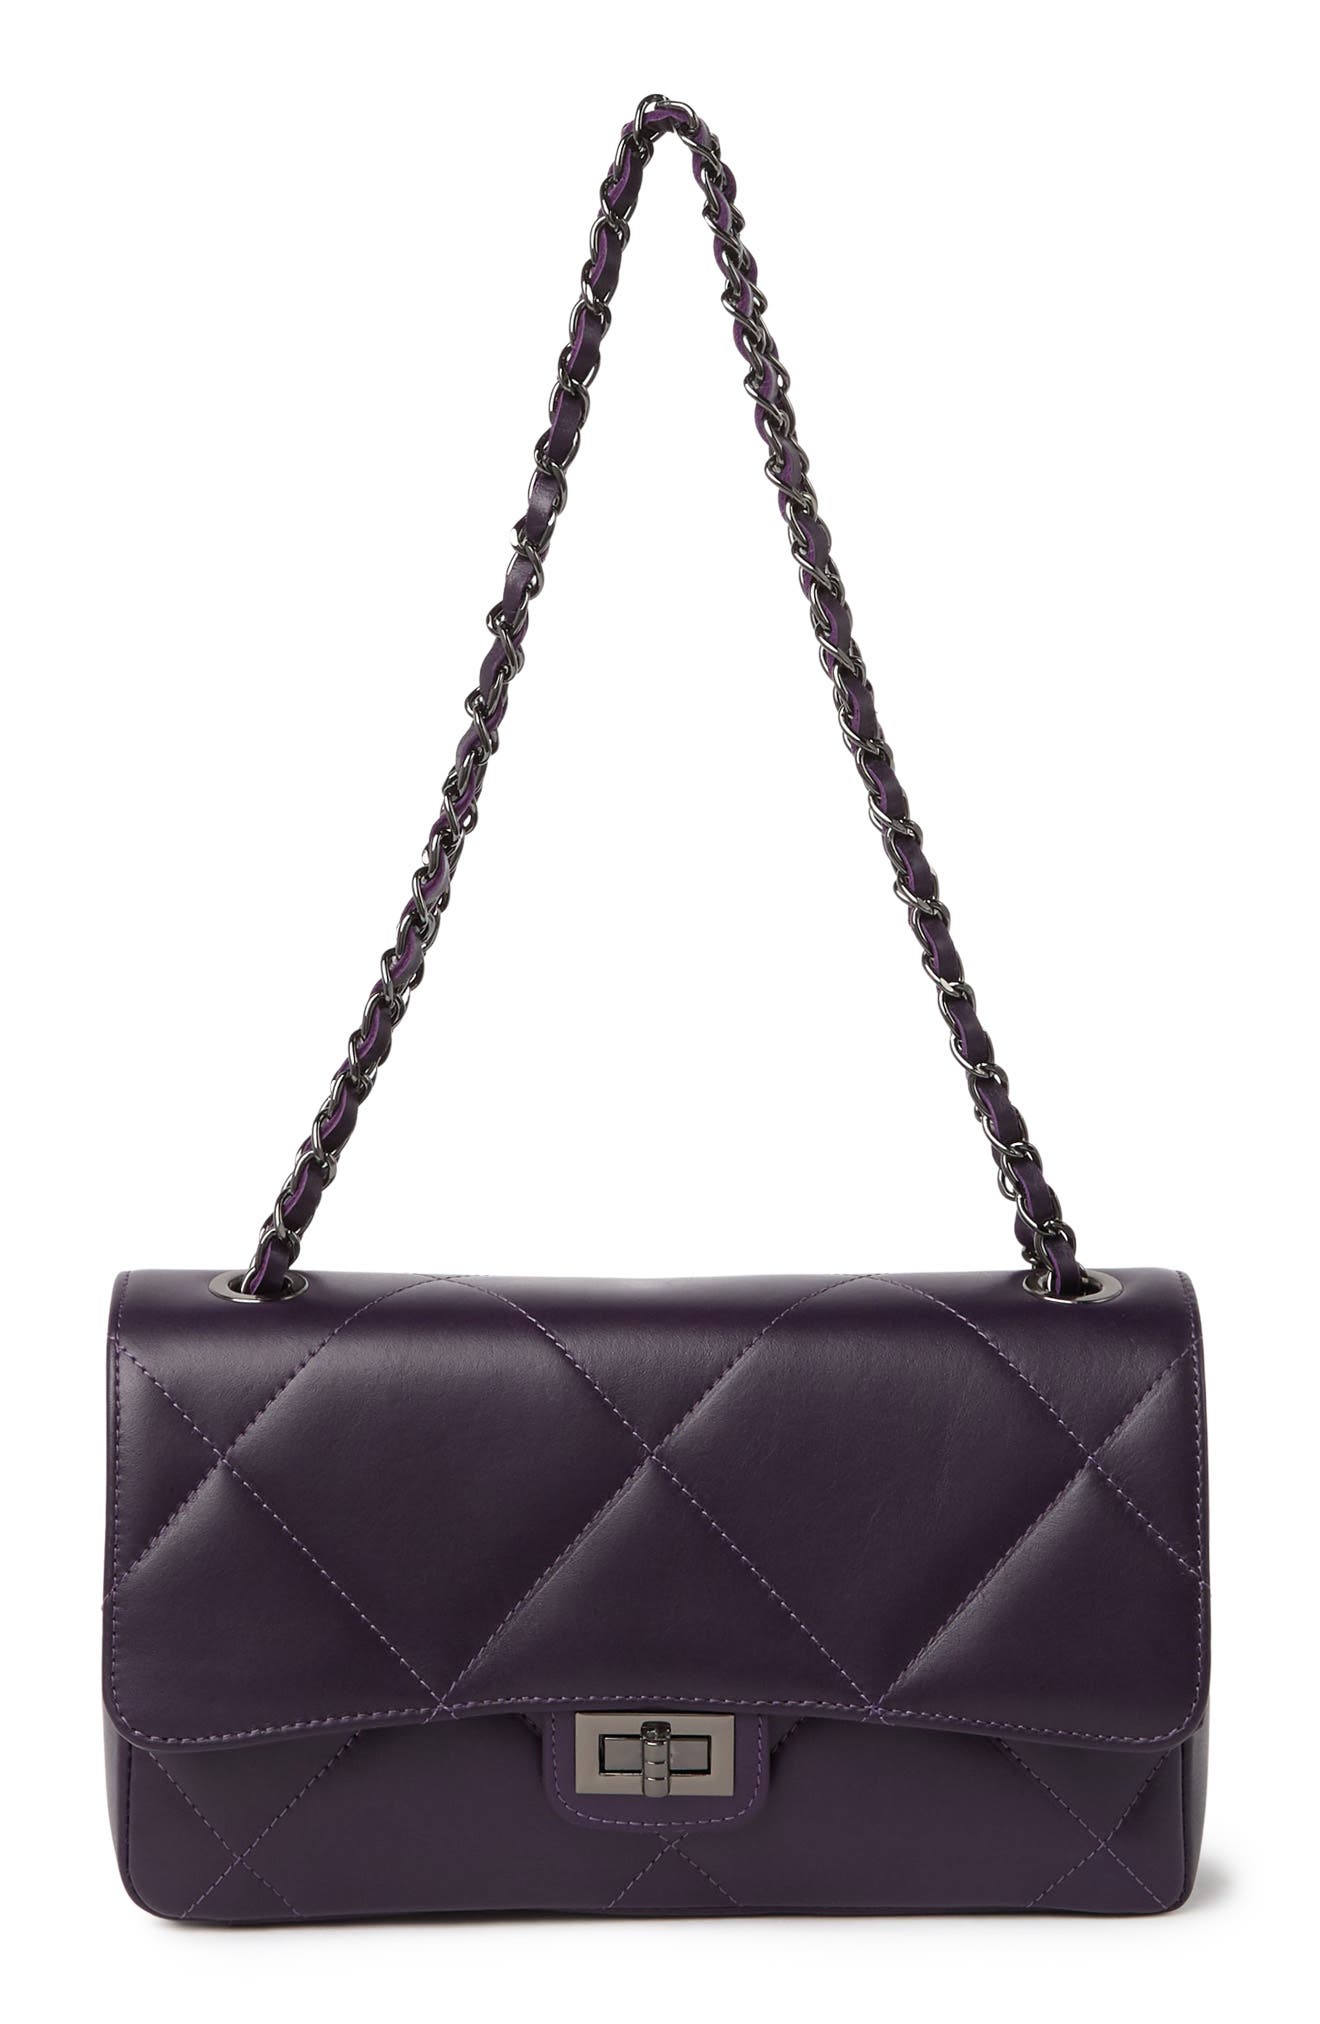 Christian Laurier Lena Flap Leather Crossbody In Purple | ModeSens